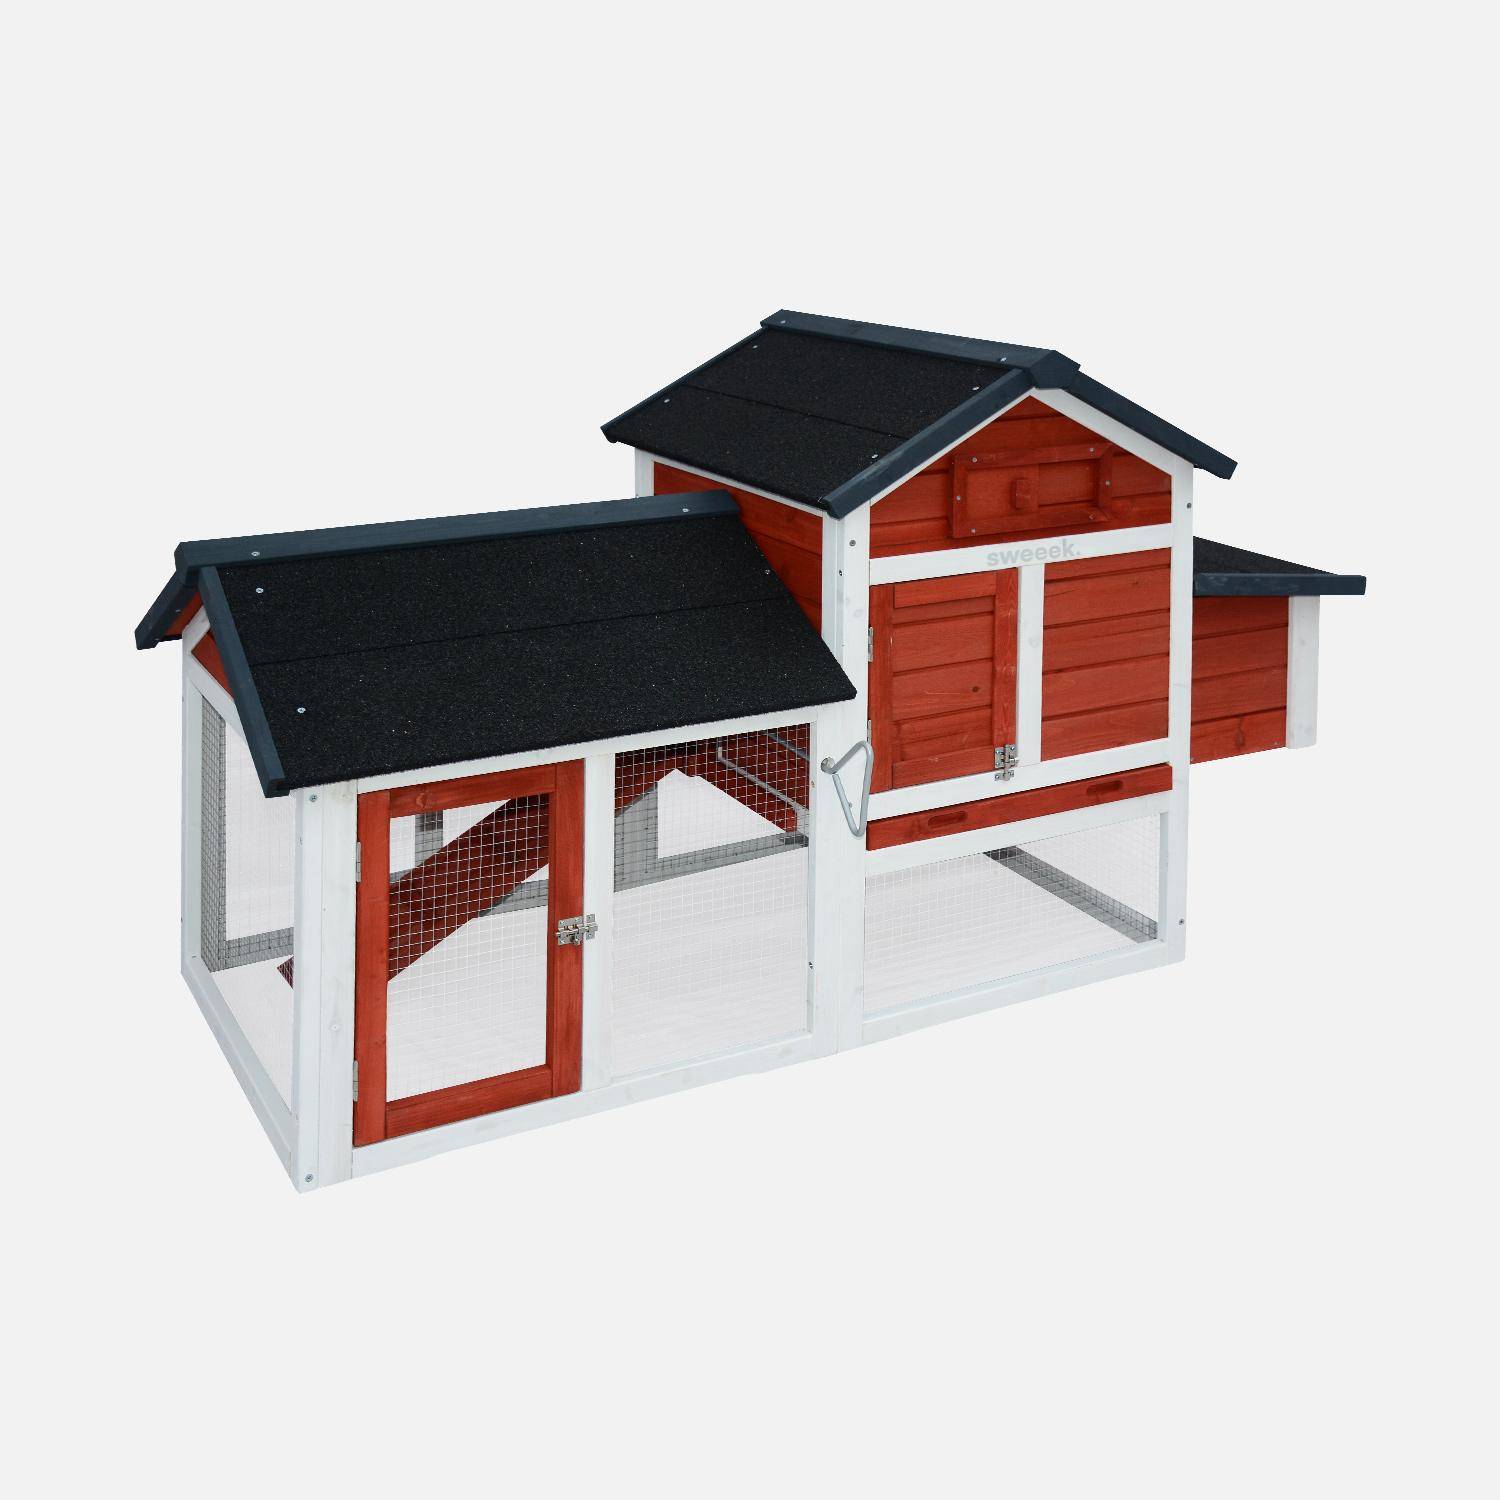 Wooden chicken coop - for 3 chickens, backyard hen cage, indoor and outdoor space - Galinette, Red Photo1